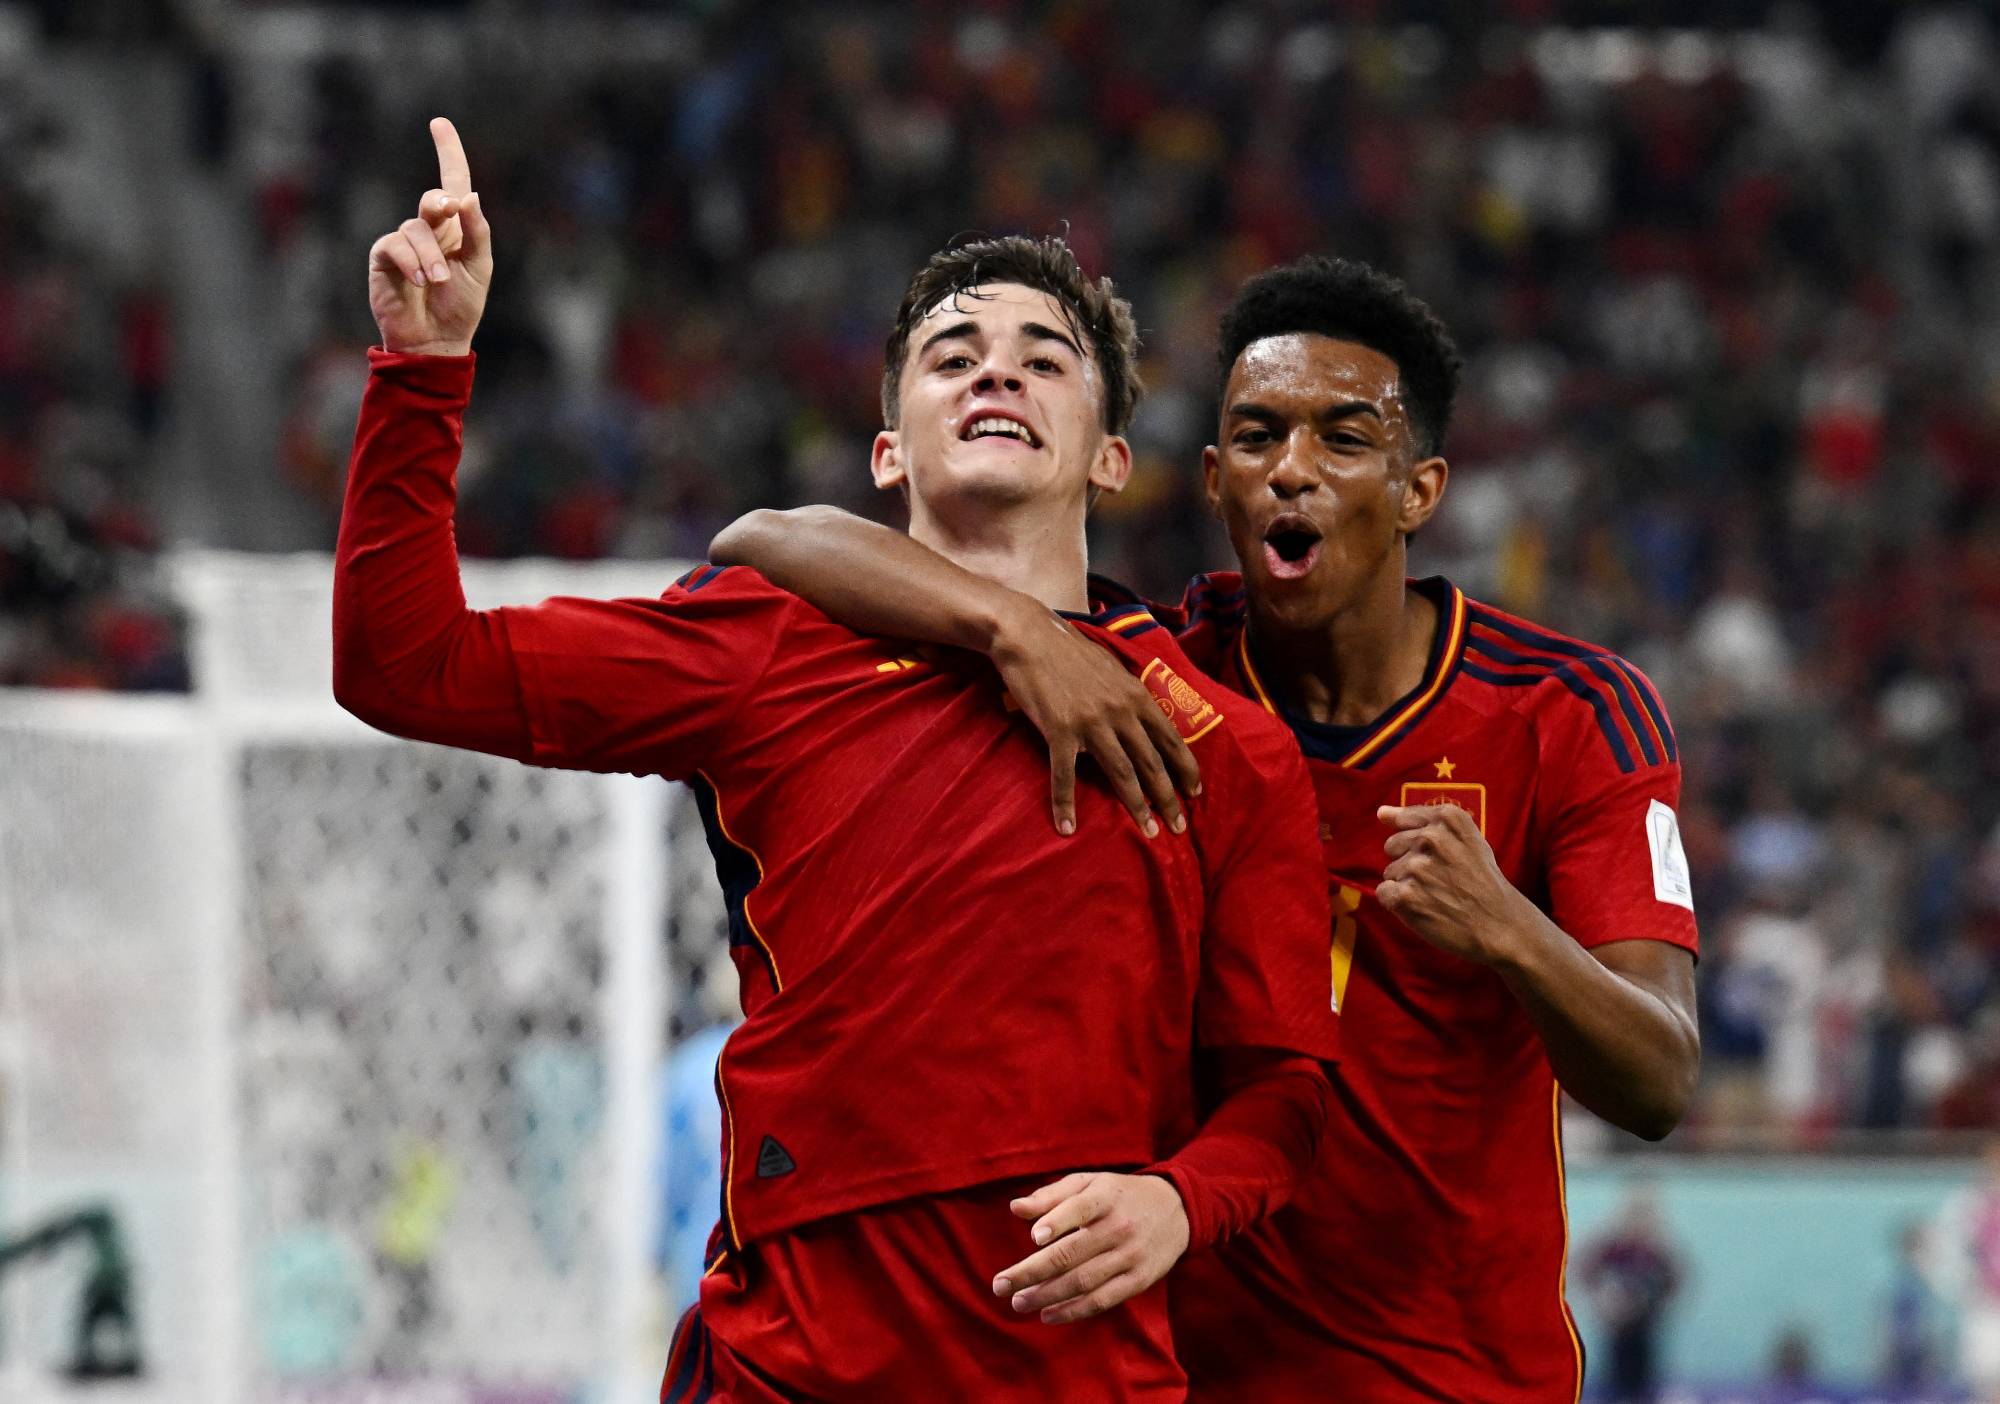 Spain makes electric start to World Cup with 7-0 rout of Costa Rica